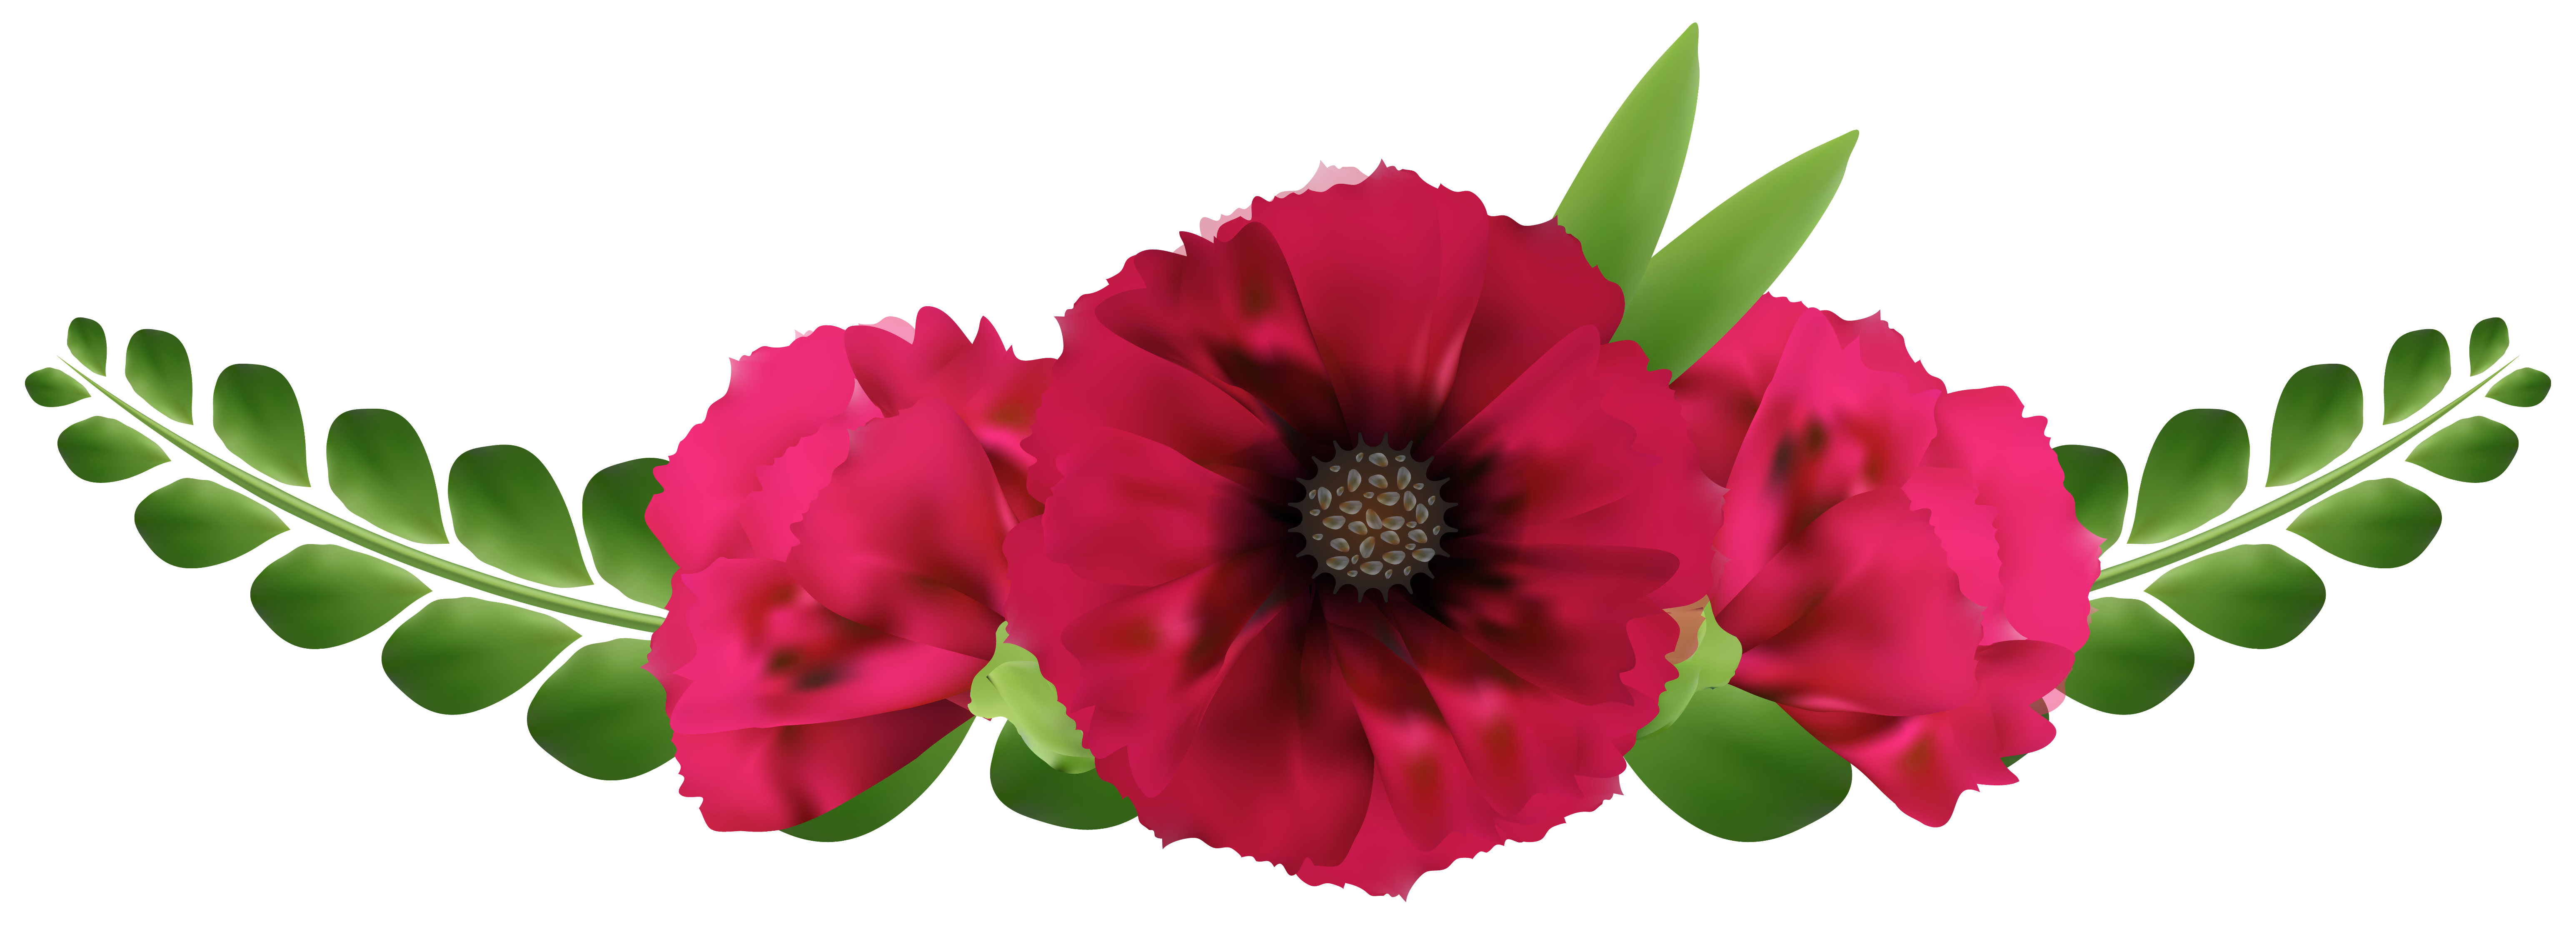 free clip art real flowers - photo #44